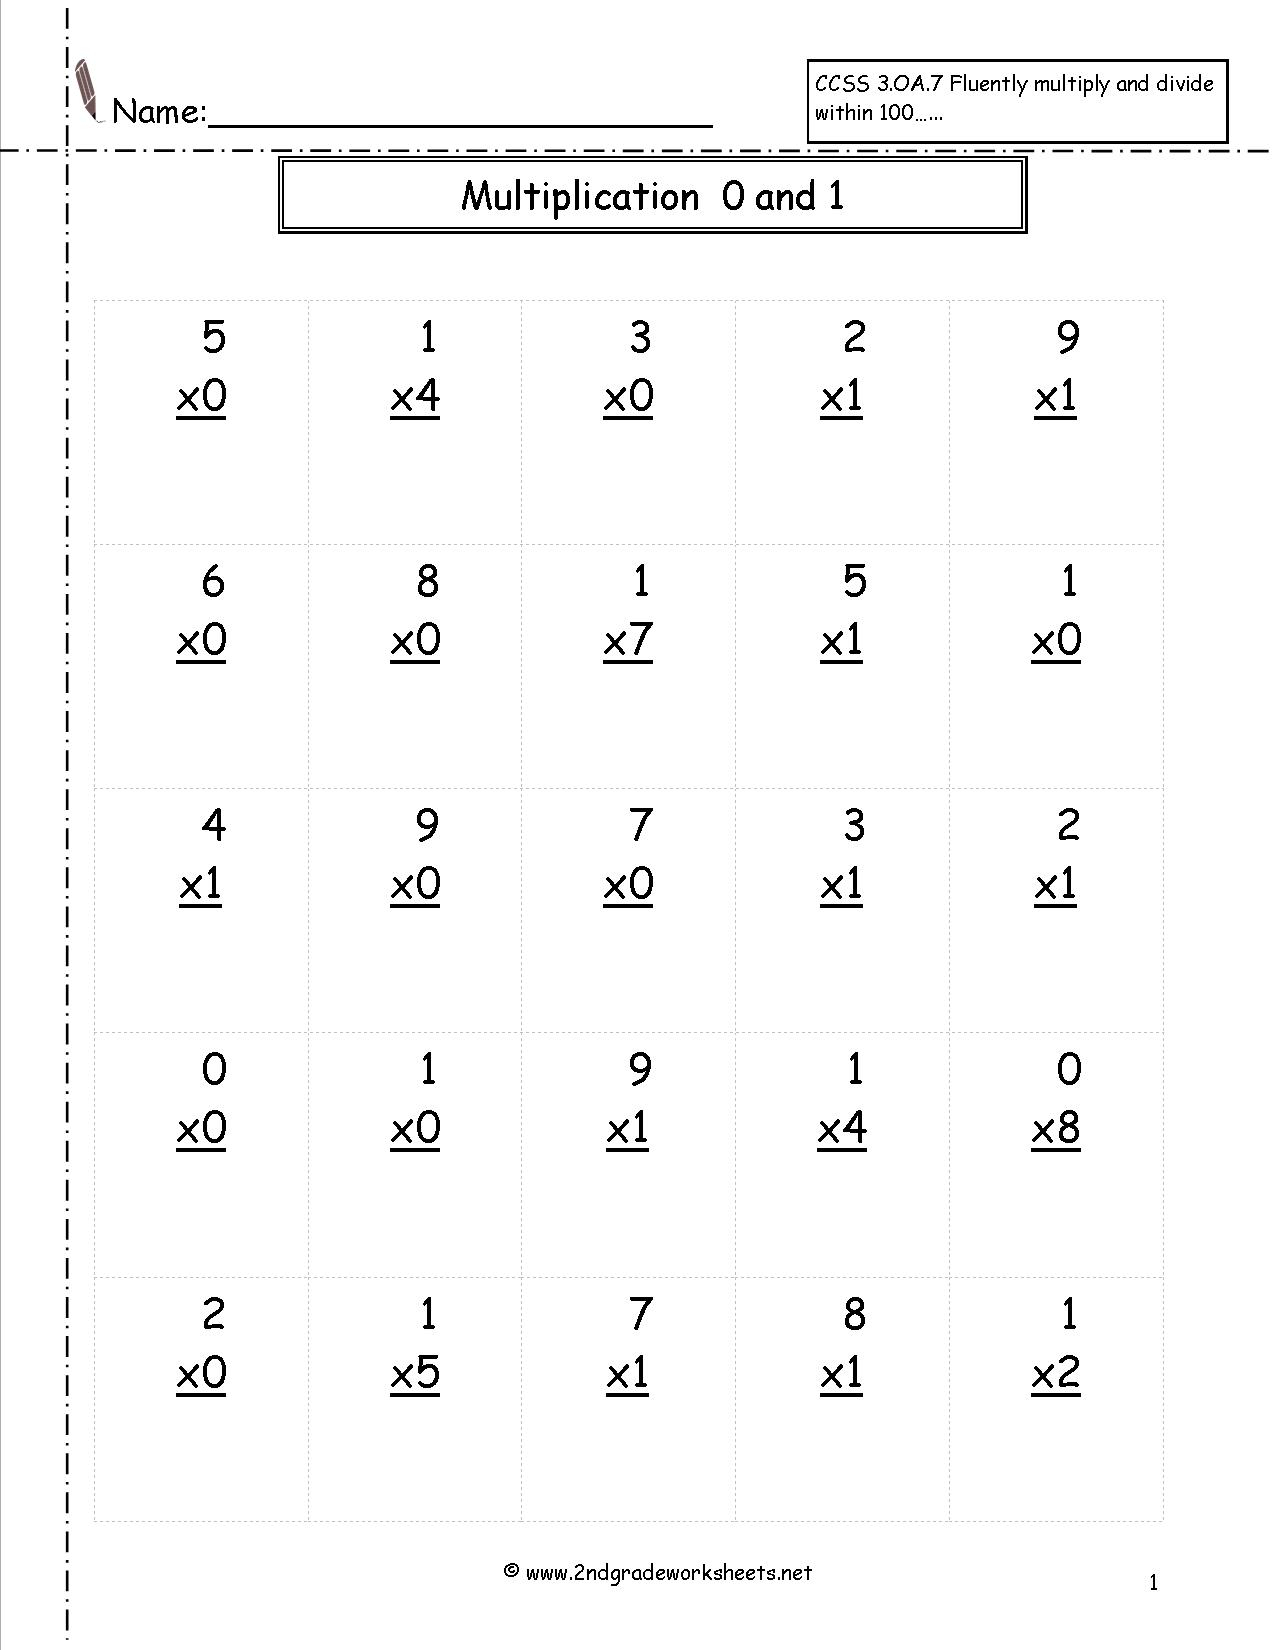 Multiplication Worksheets And Printouts intended for Worksheets On Multiplication For Grade 2